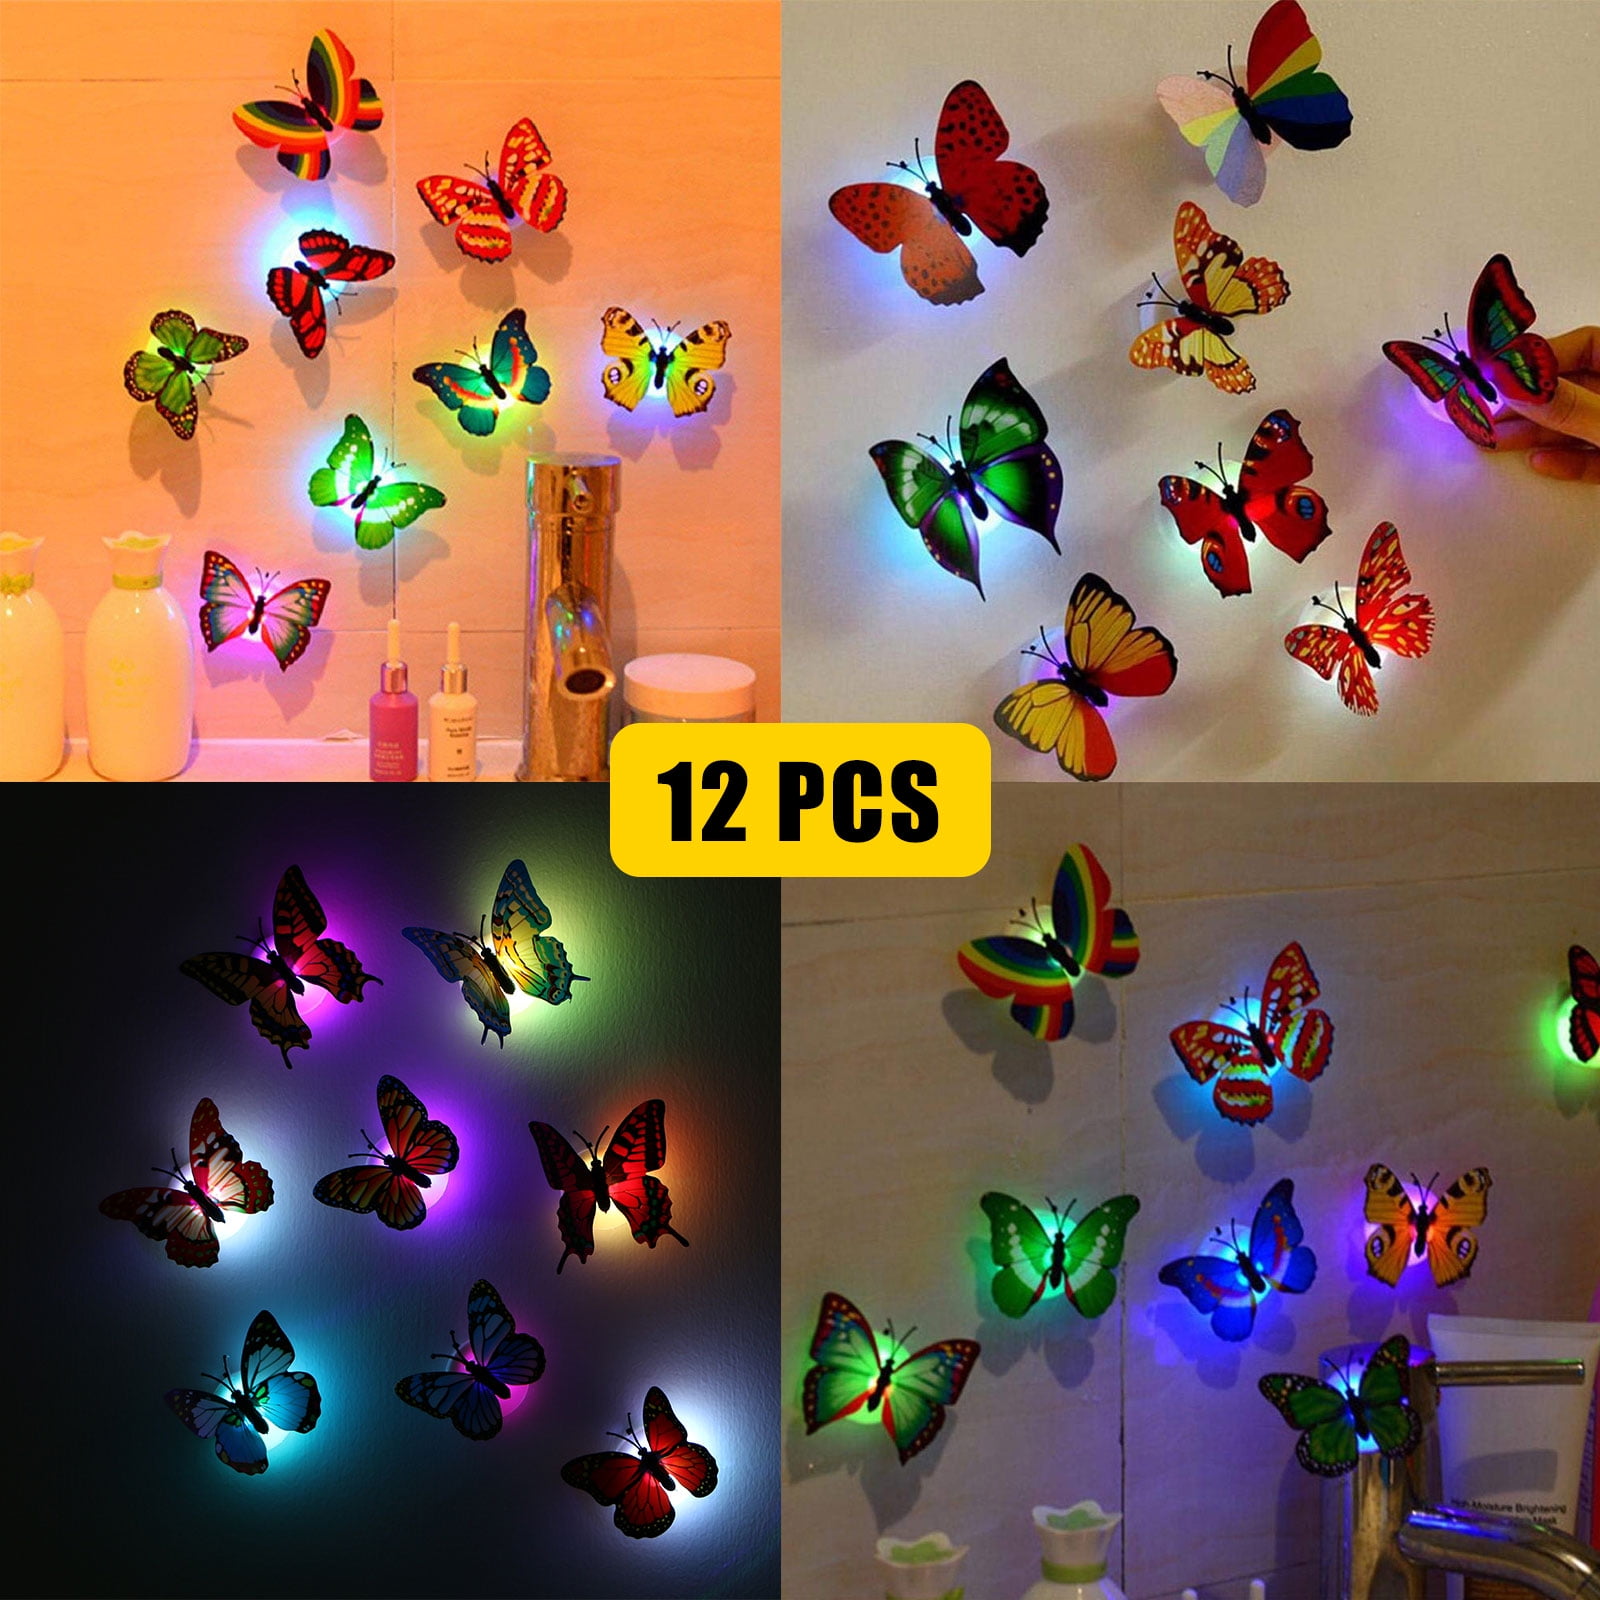 12 Pcs 3D Butterfly Wall Stickers Decals Home Decor Poster Kids Rooms Adhesive 